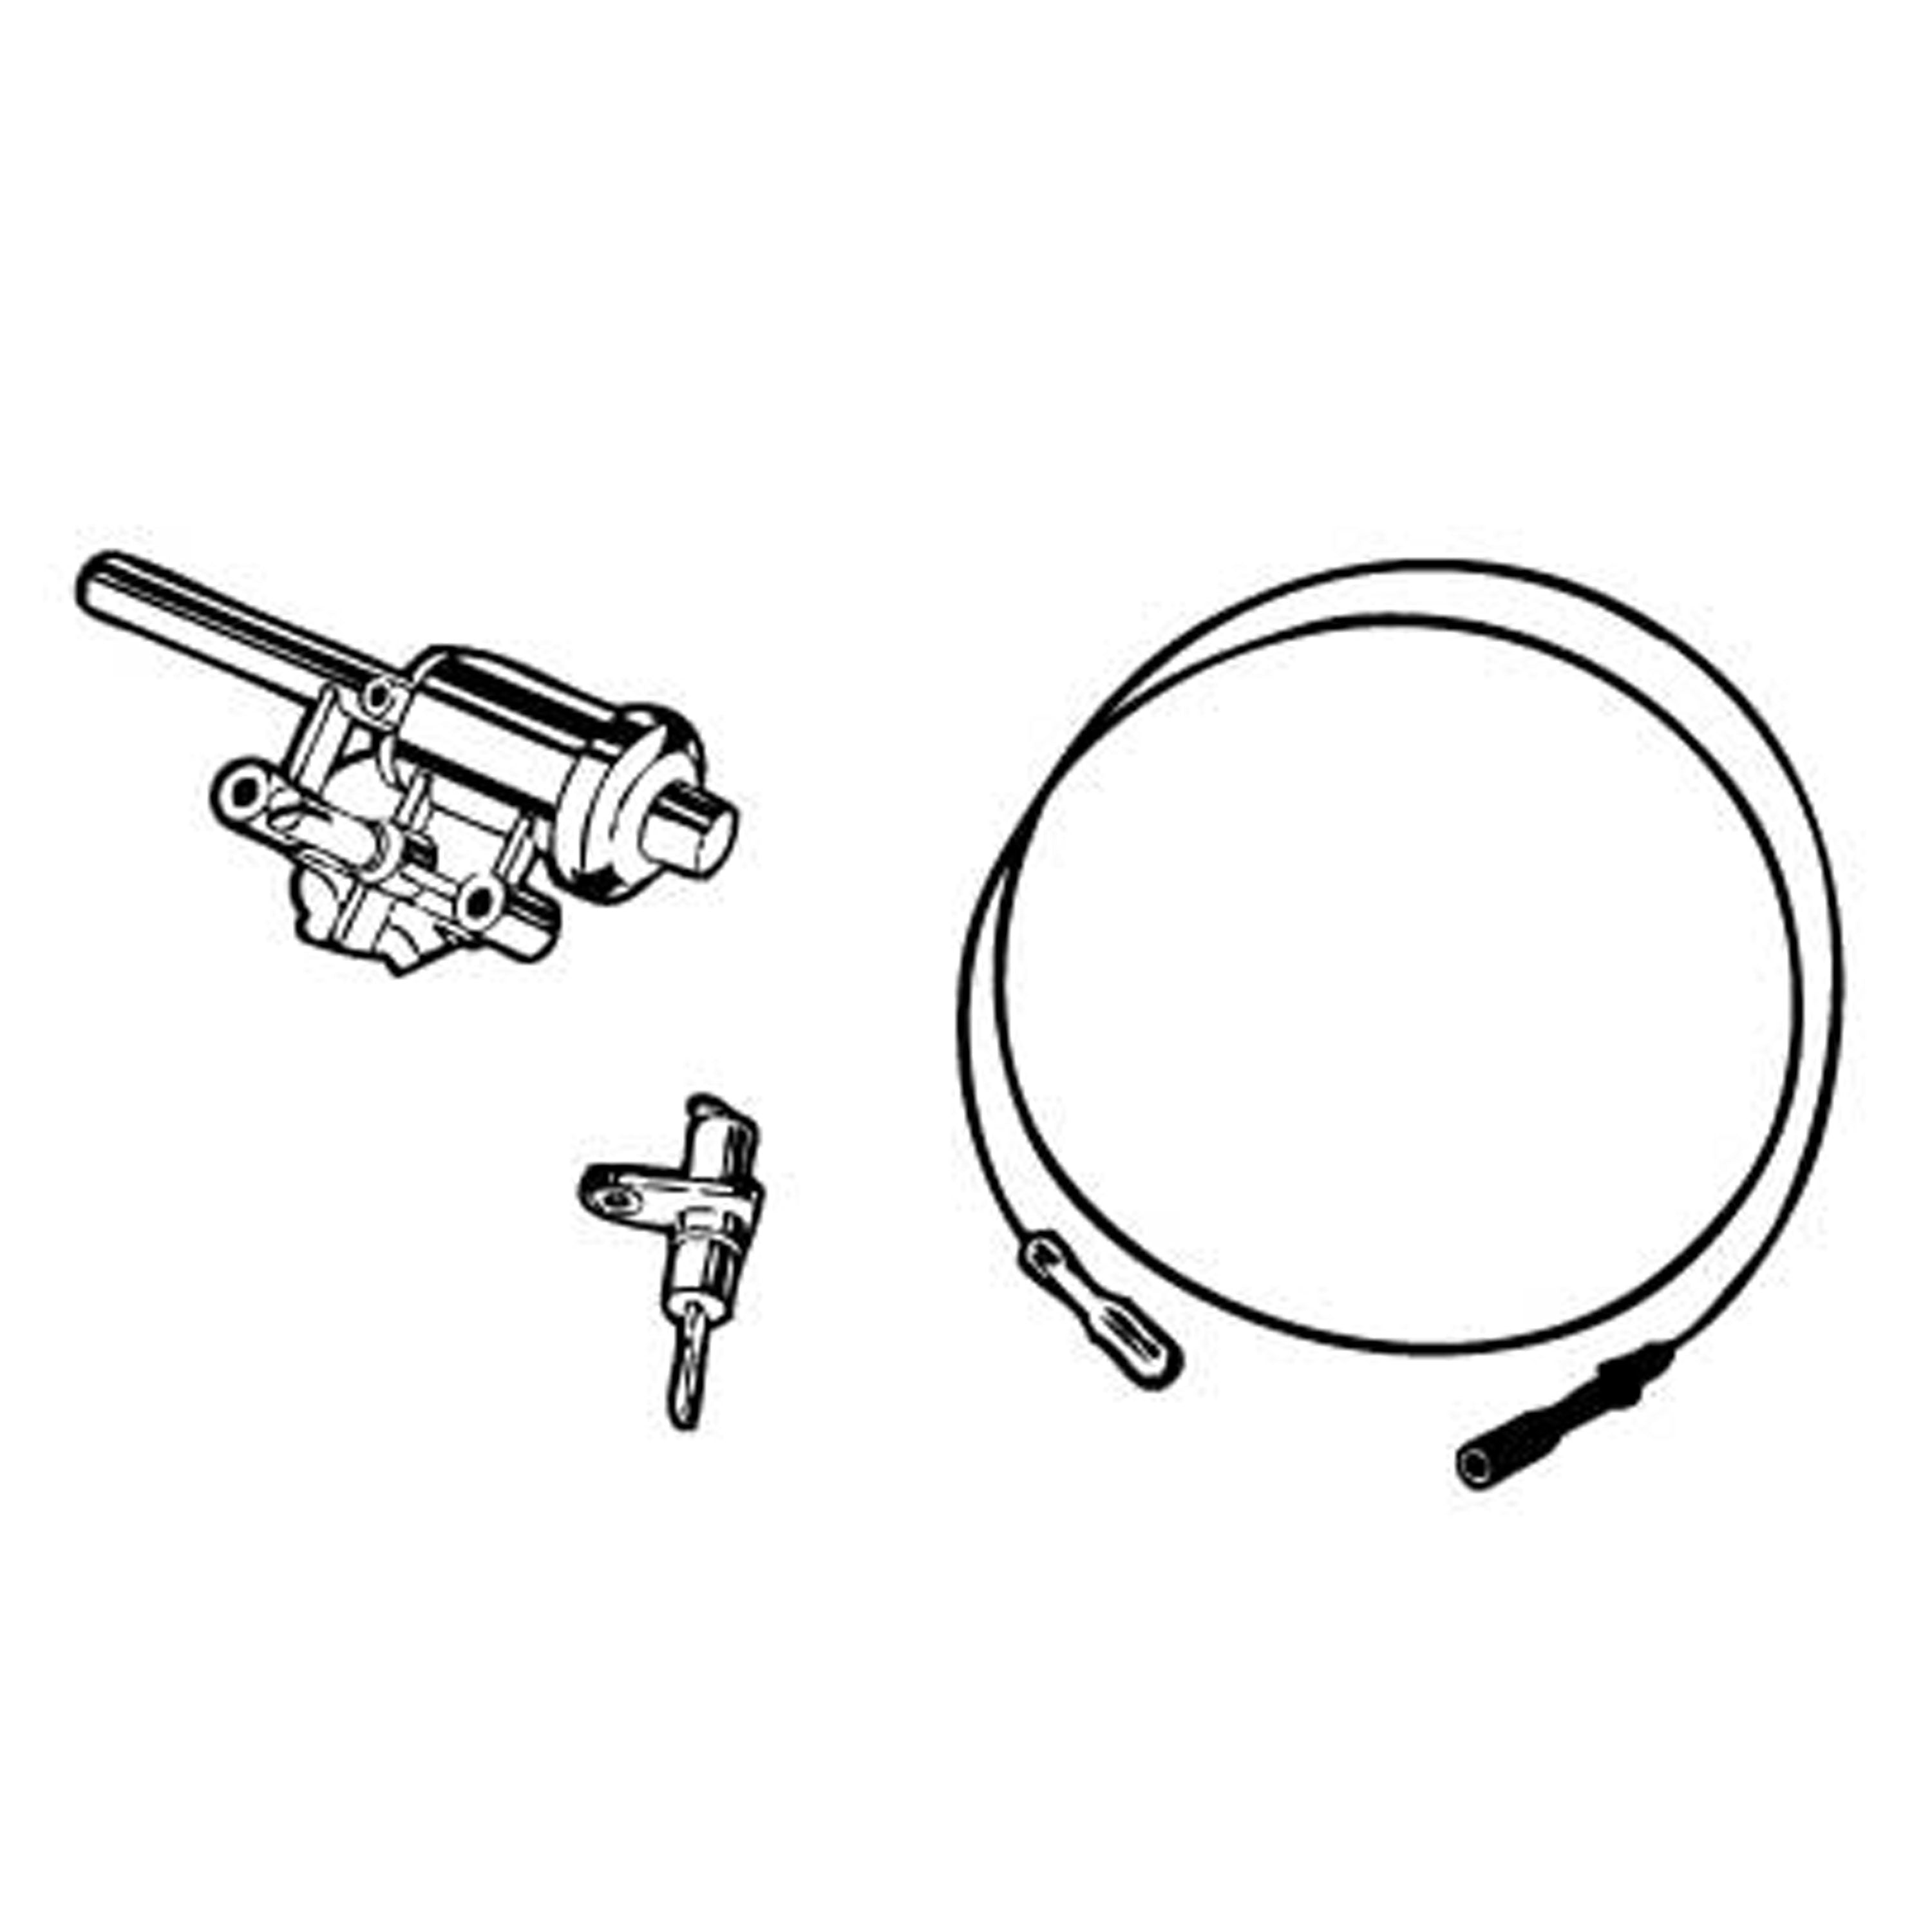 Suburban 232771 Stove Ignition Wire for SCS3BE, SRS3L, and SRS3S